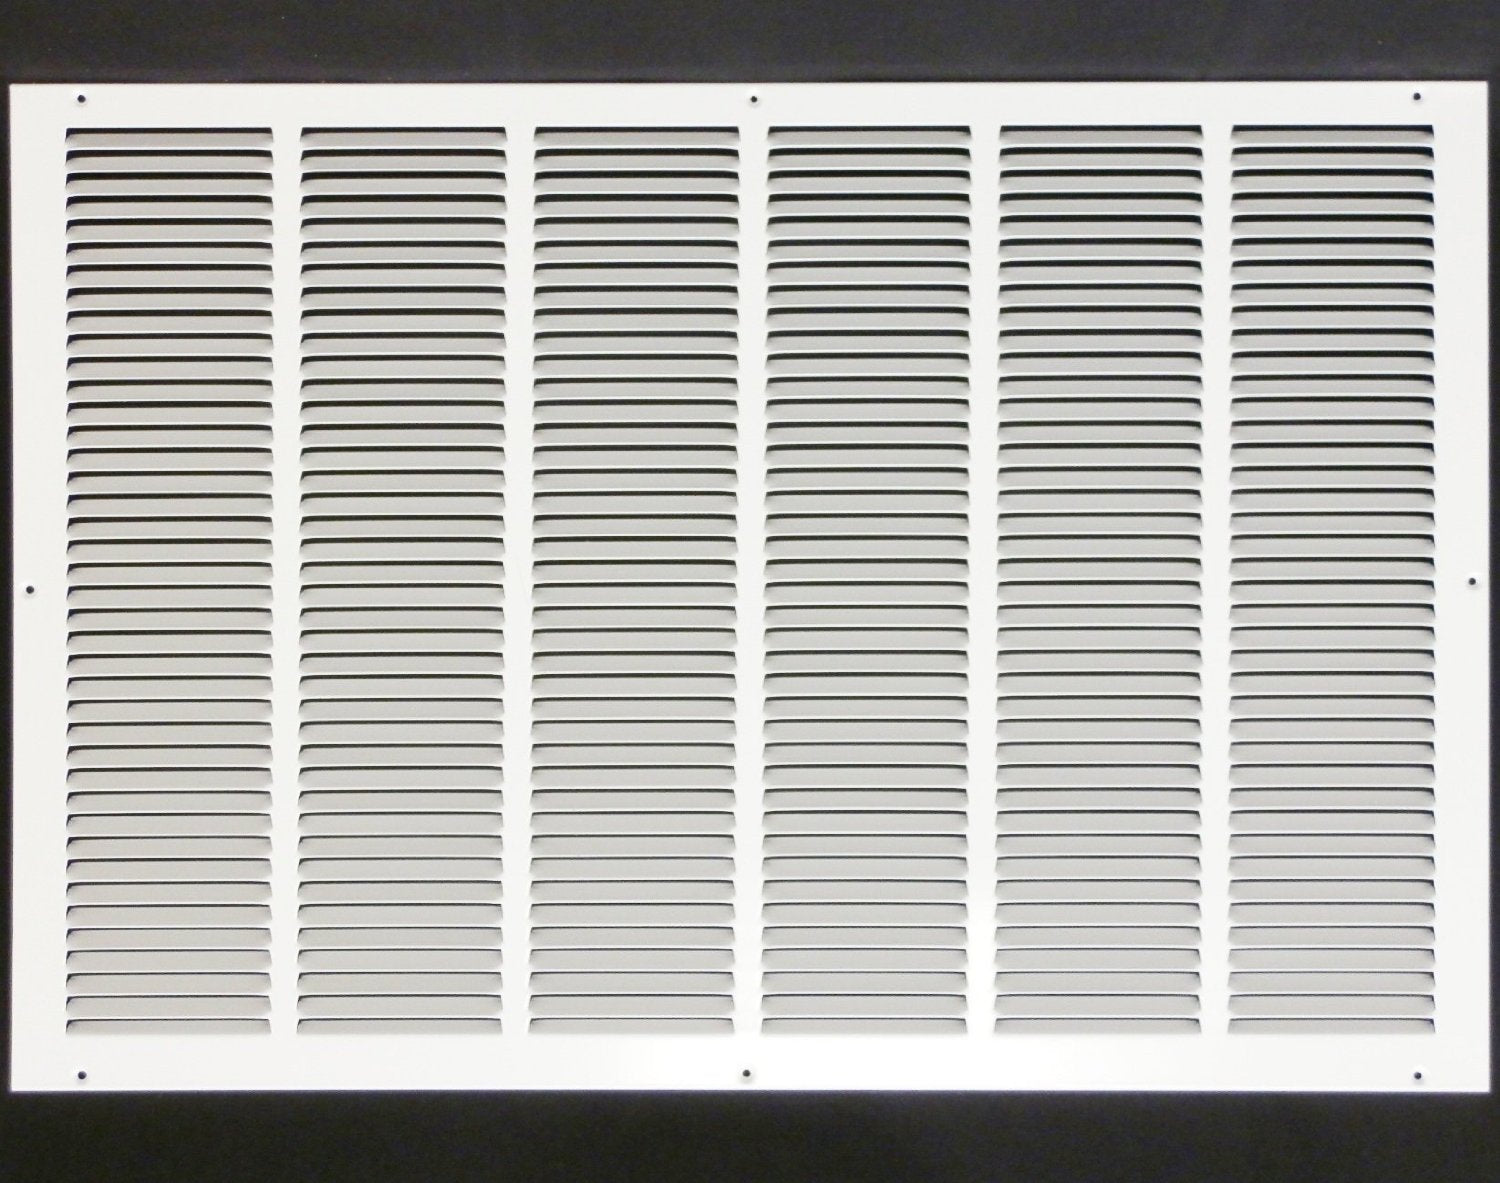 32" X 25" Air Vent Return Grilles - Sidewall and Ceiling - Steel